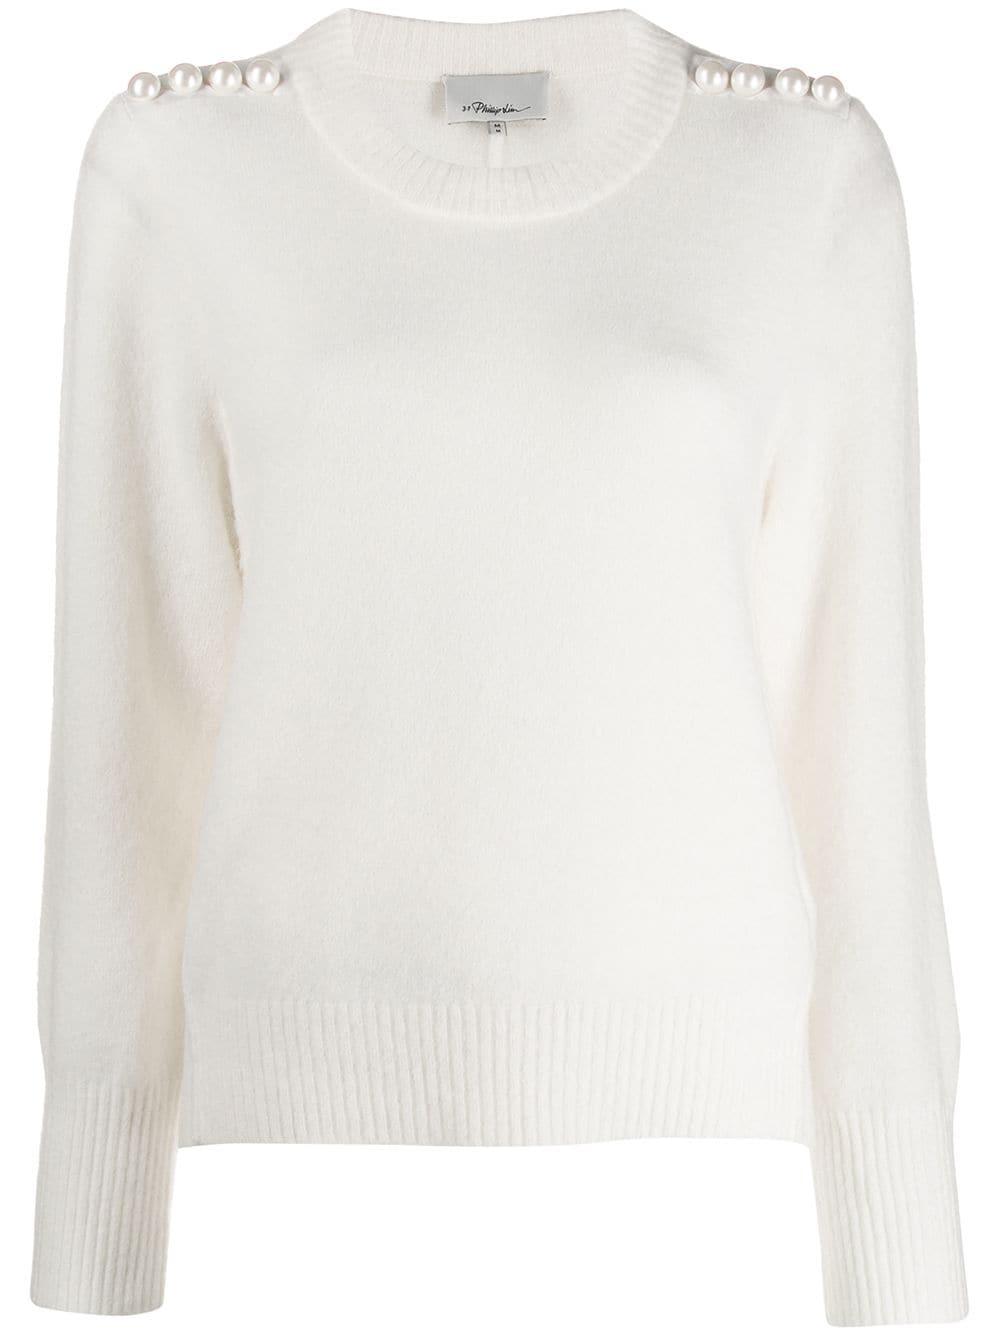 3.1 Phillip Lim Wool Pearl Embellished Sweater in White - Lyst